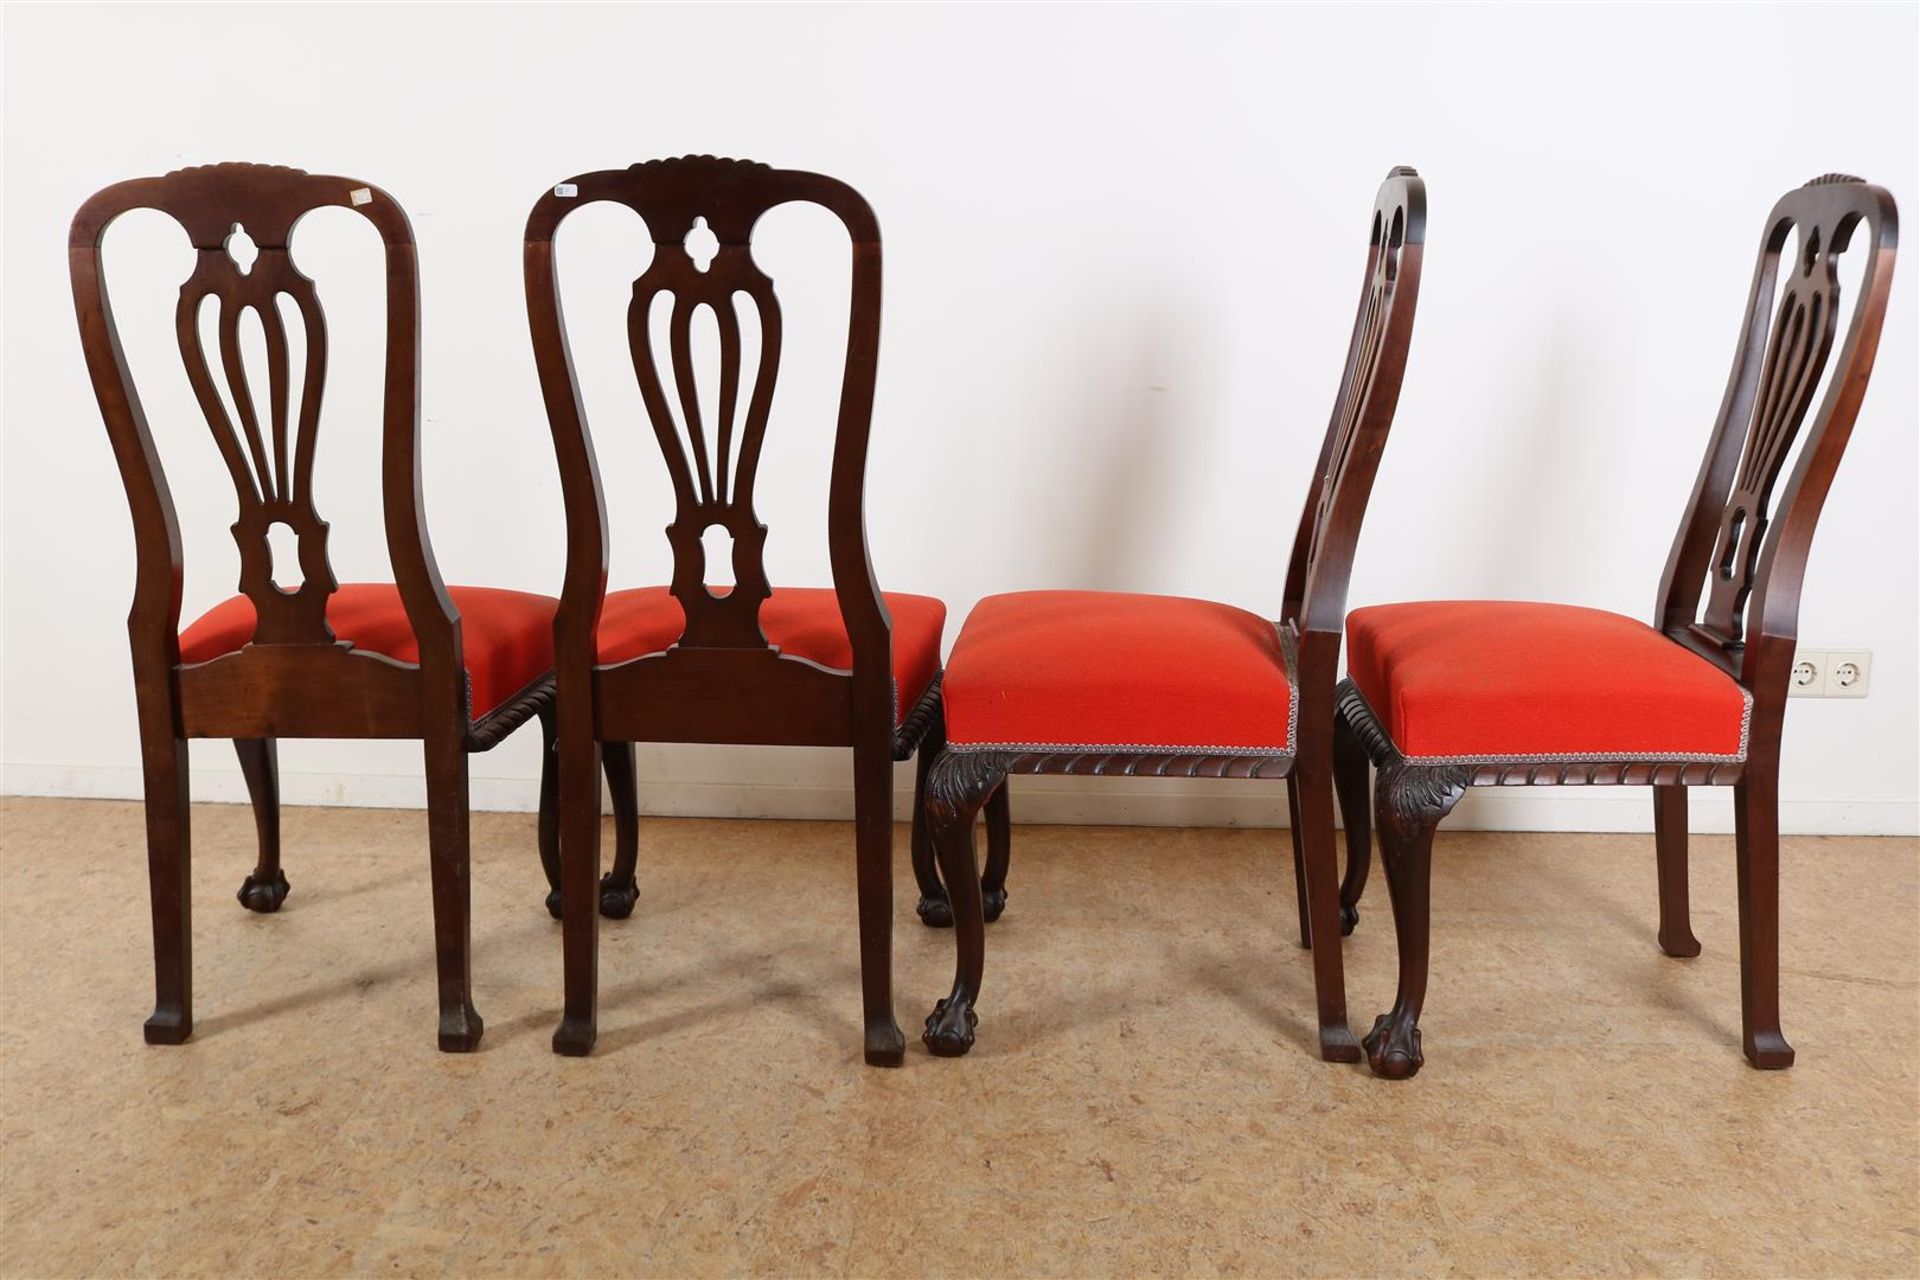 Series of 4 Chippendale-style chairs  - Bild 4 aus 4